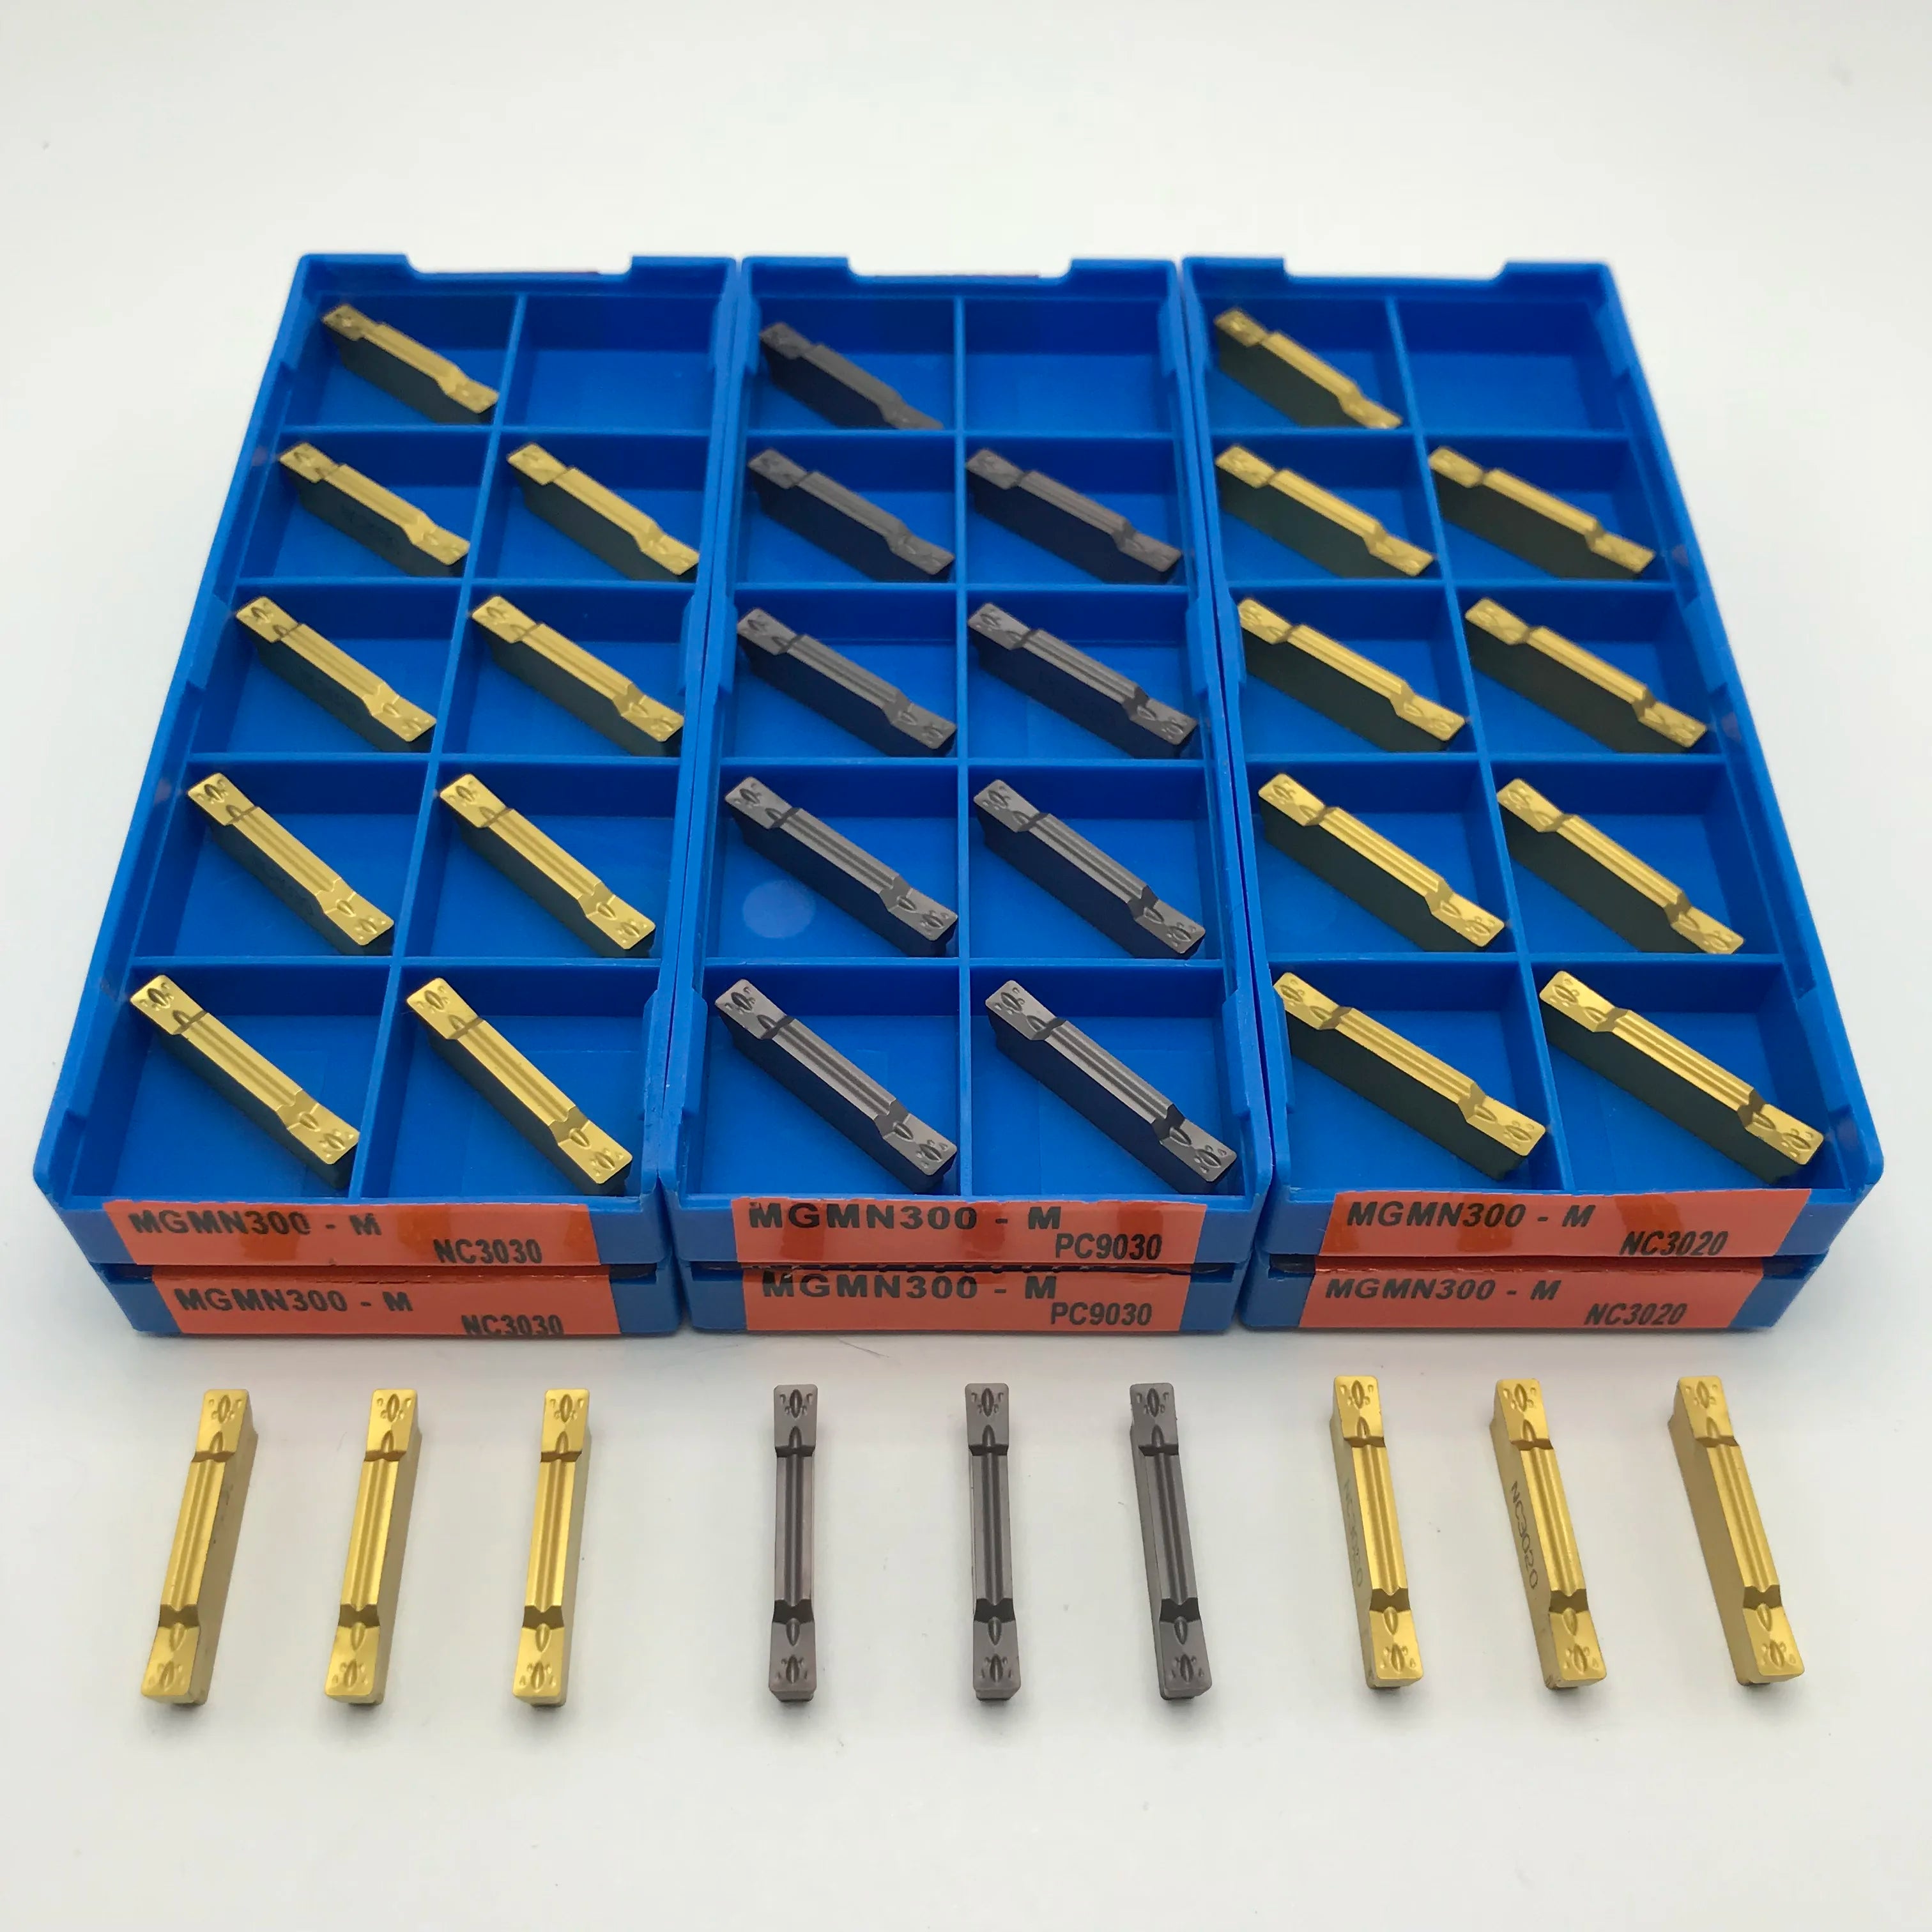 MGMN150 MGMN200 MGMN300 MGMN400 Slotted Cutting Carbide Blade Lathe Tool CNC Cutting and Slotting Lathe Tool